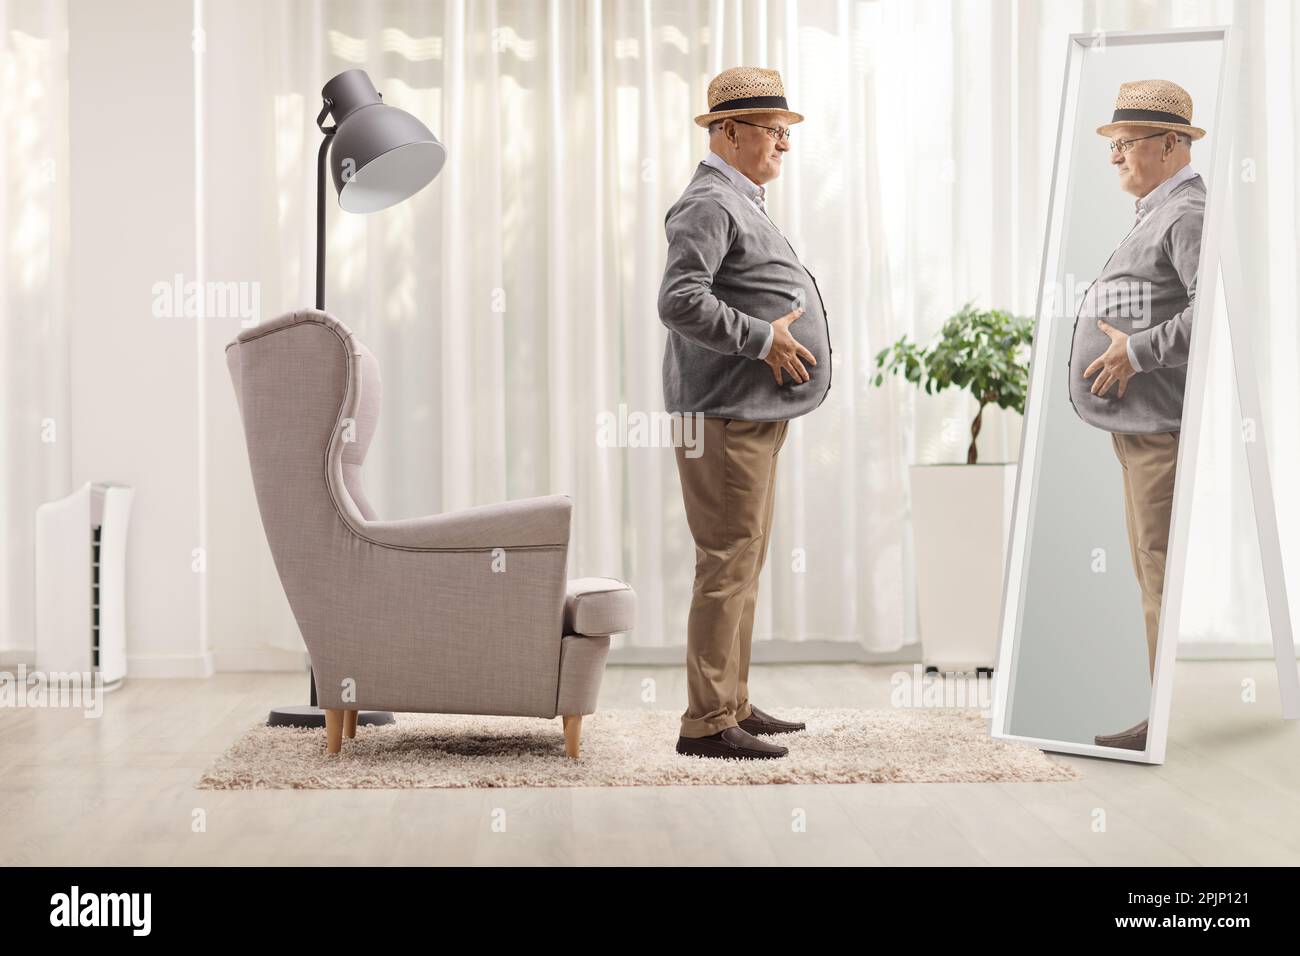 Elderly man with a big belly standing in front of an armchair and looking at a mirror at home Stock Photo